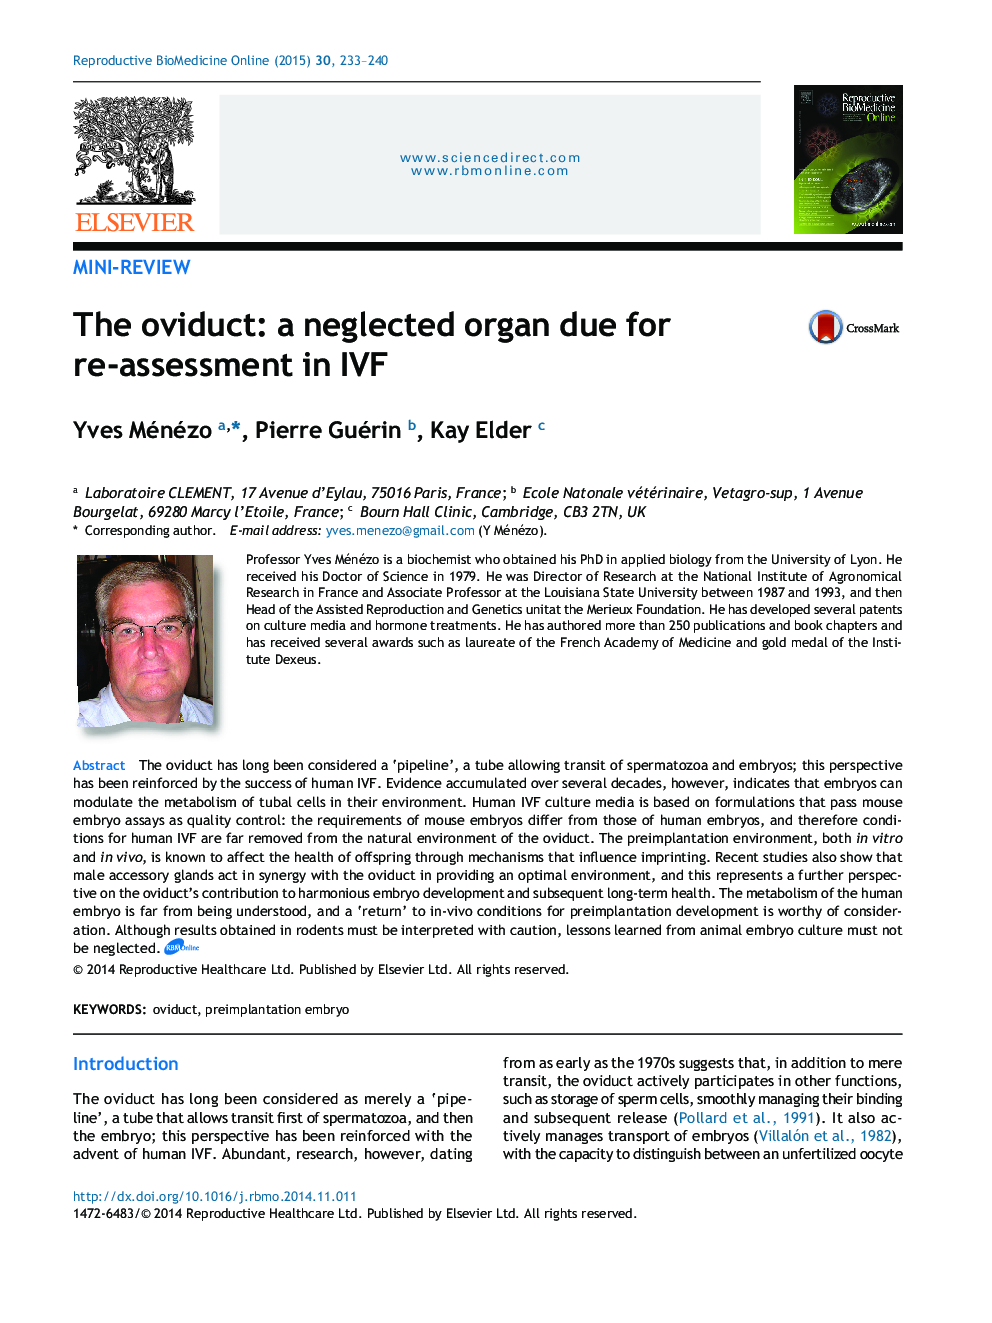 The oviduct: a neglected organ due for re-assessment in IVF